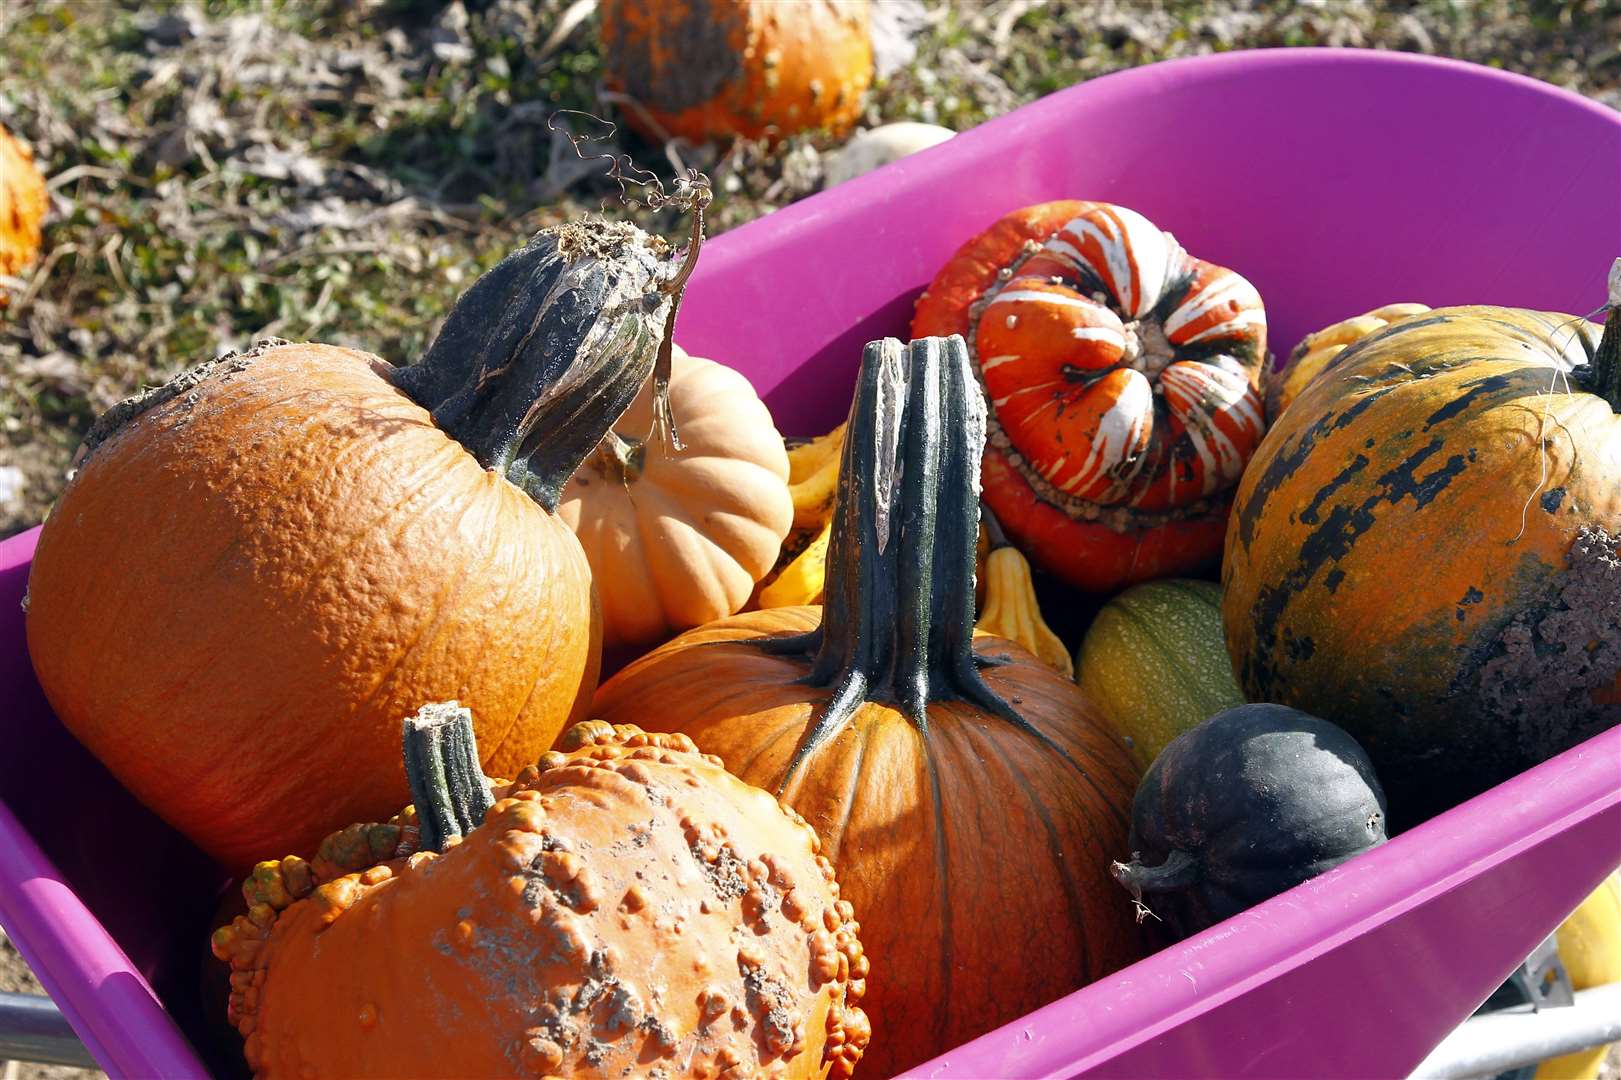 There are many varieties of pumpkin to pick Picture: Sean Aidan